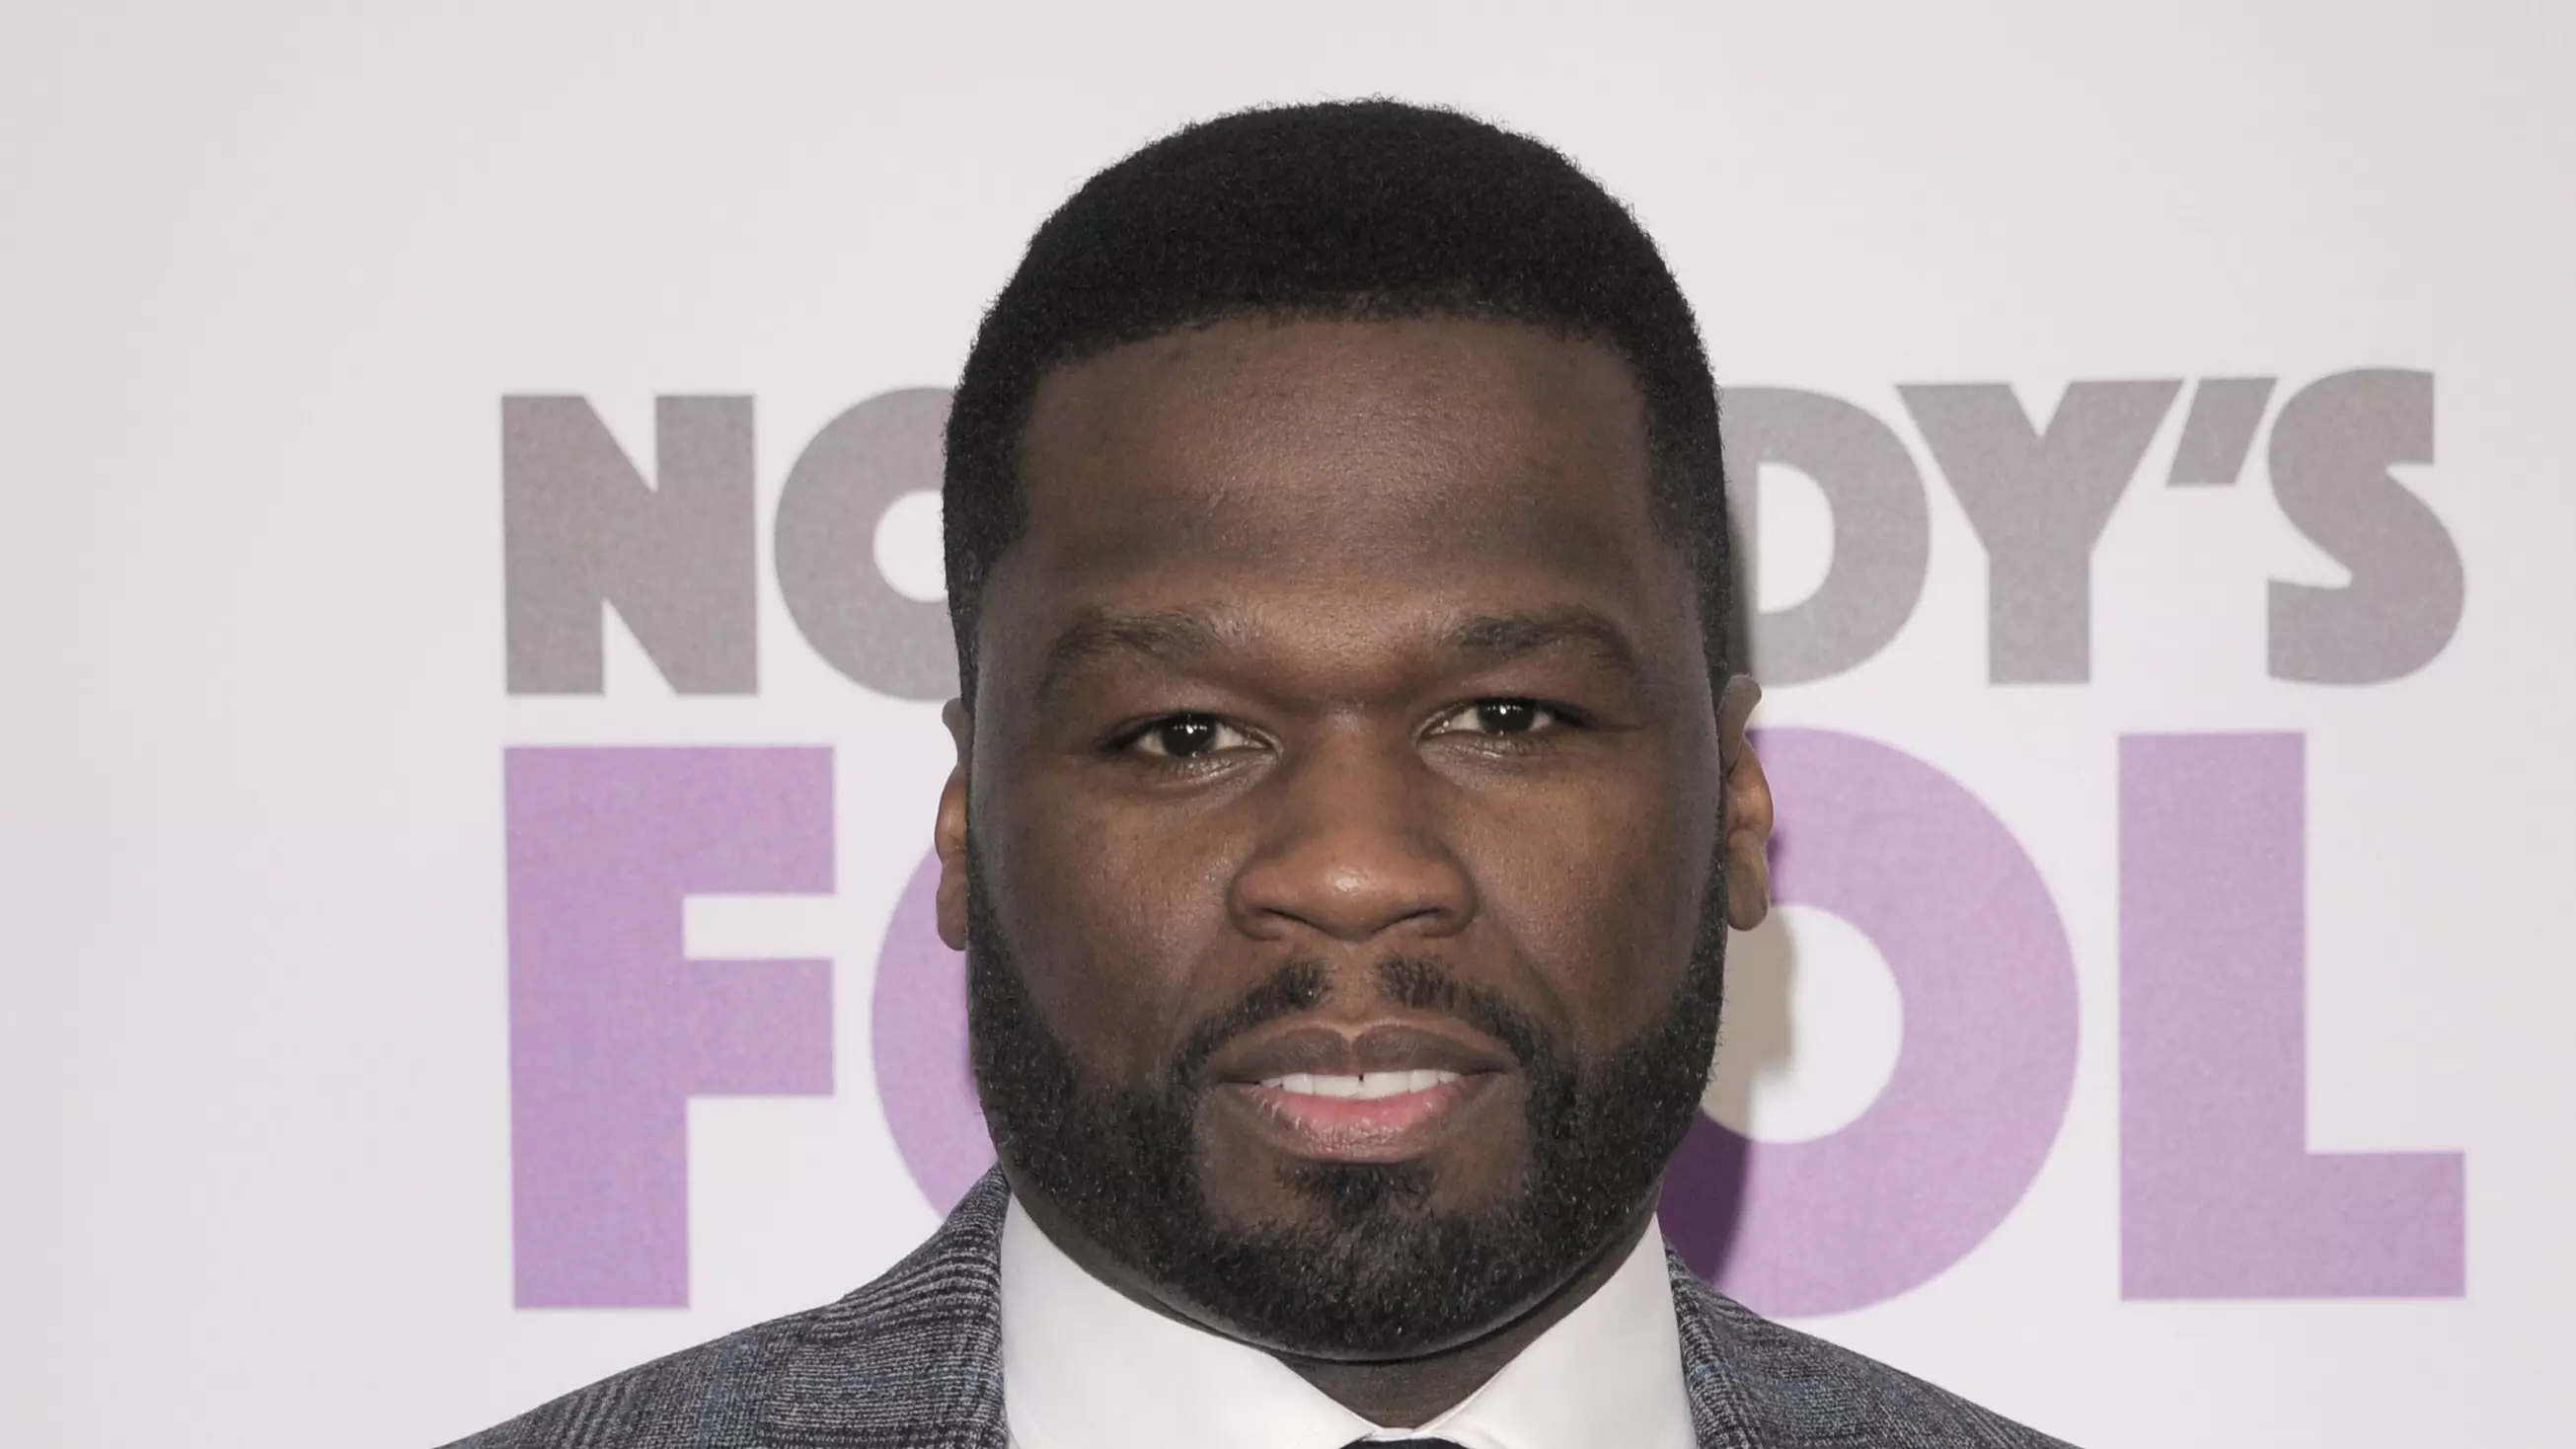 Fan Who Stole 50 Cent CD While In Fifth Grade Pays Rapper $20 